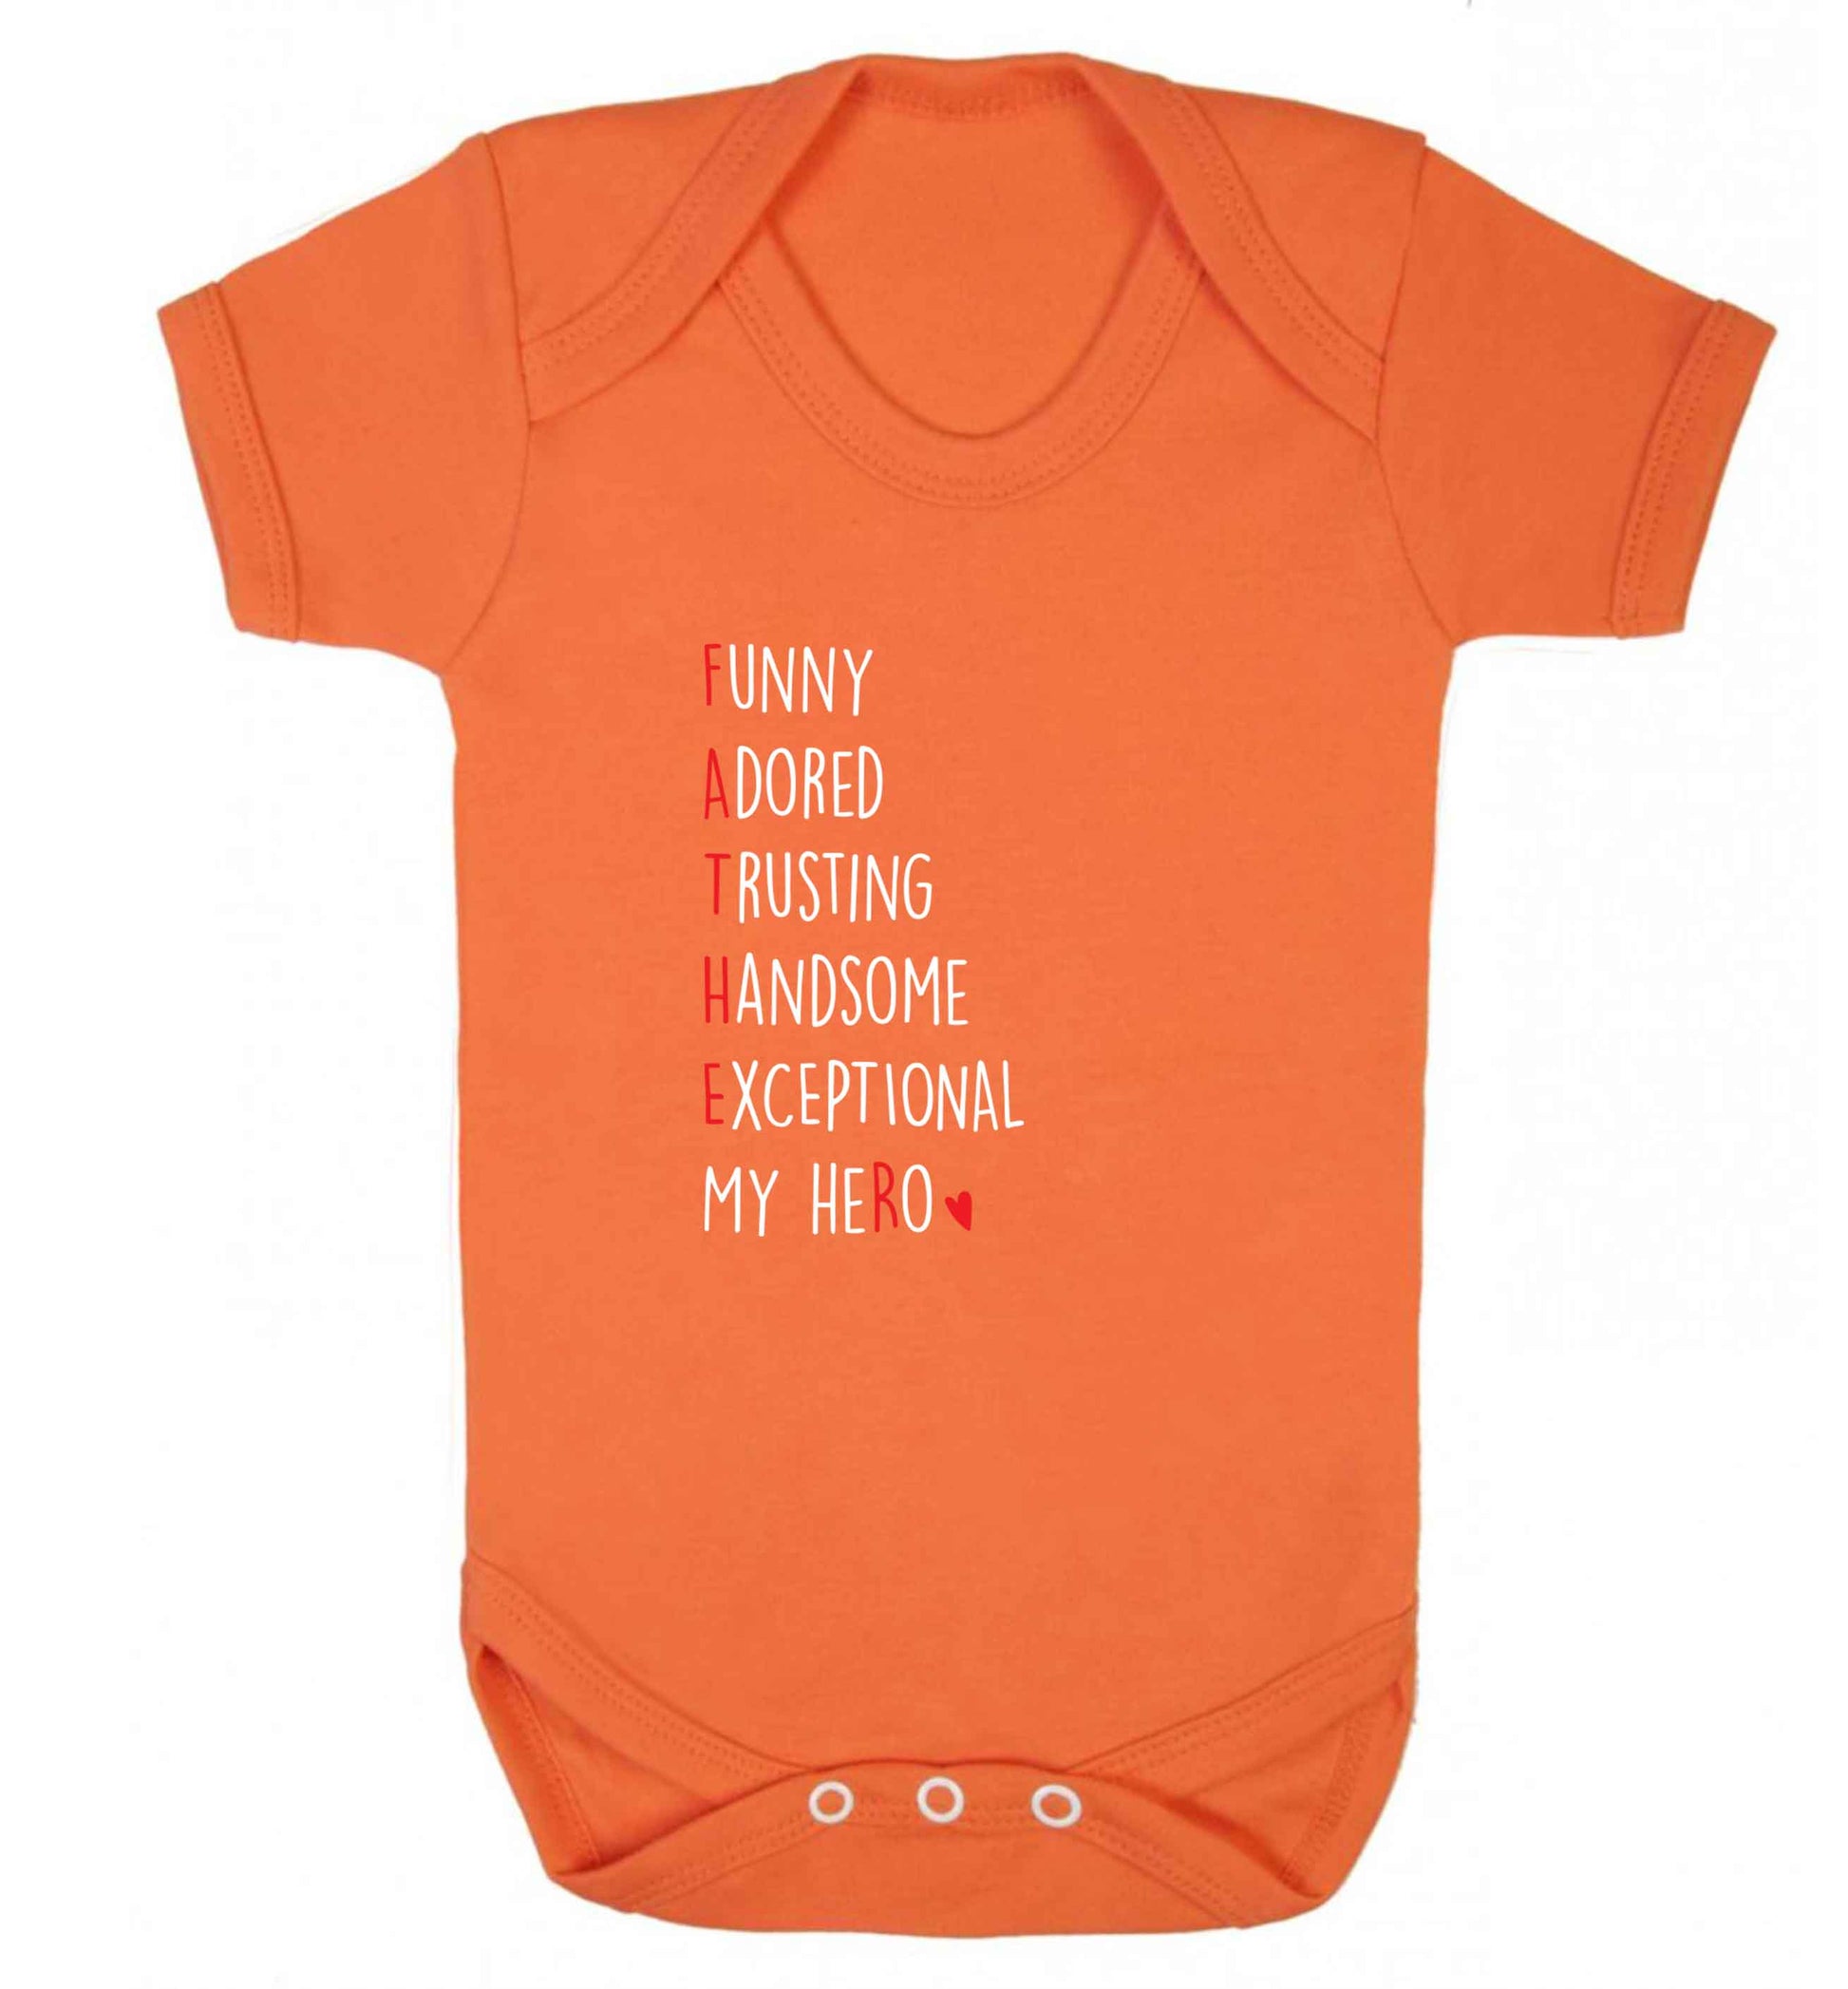 Father meaning hero acrostic poem baby vest orange 18-24 months